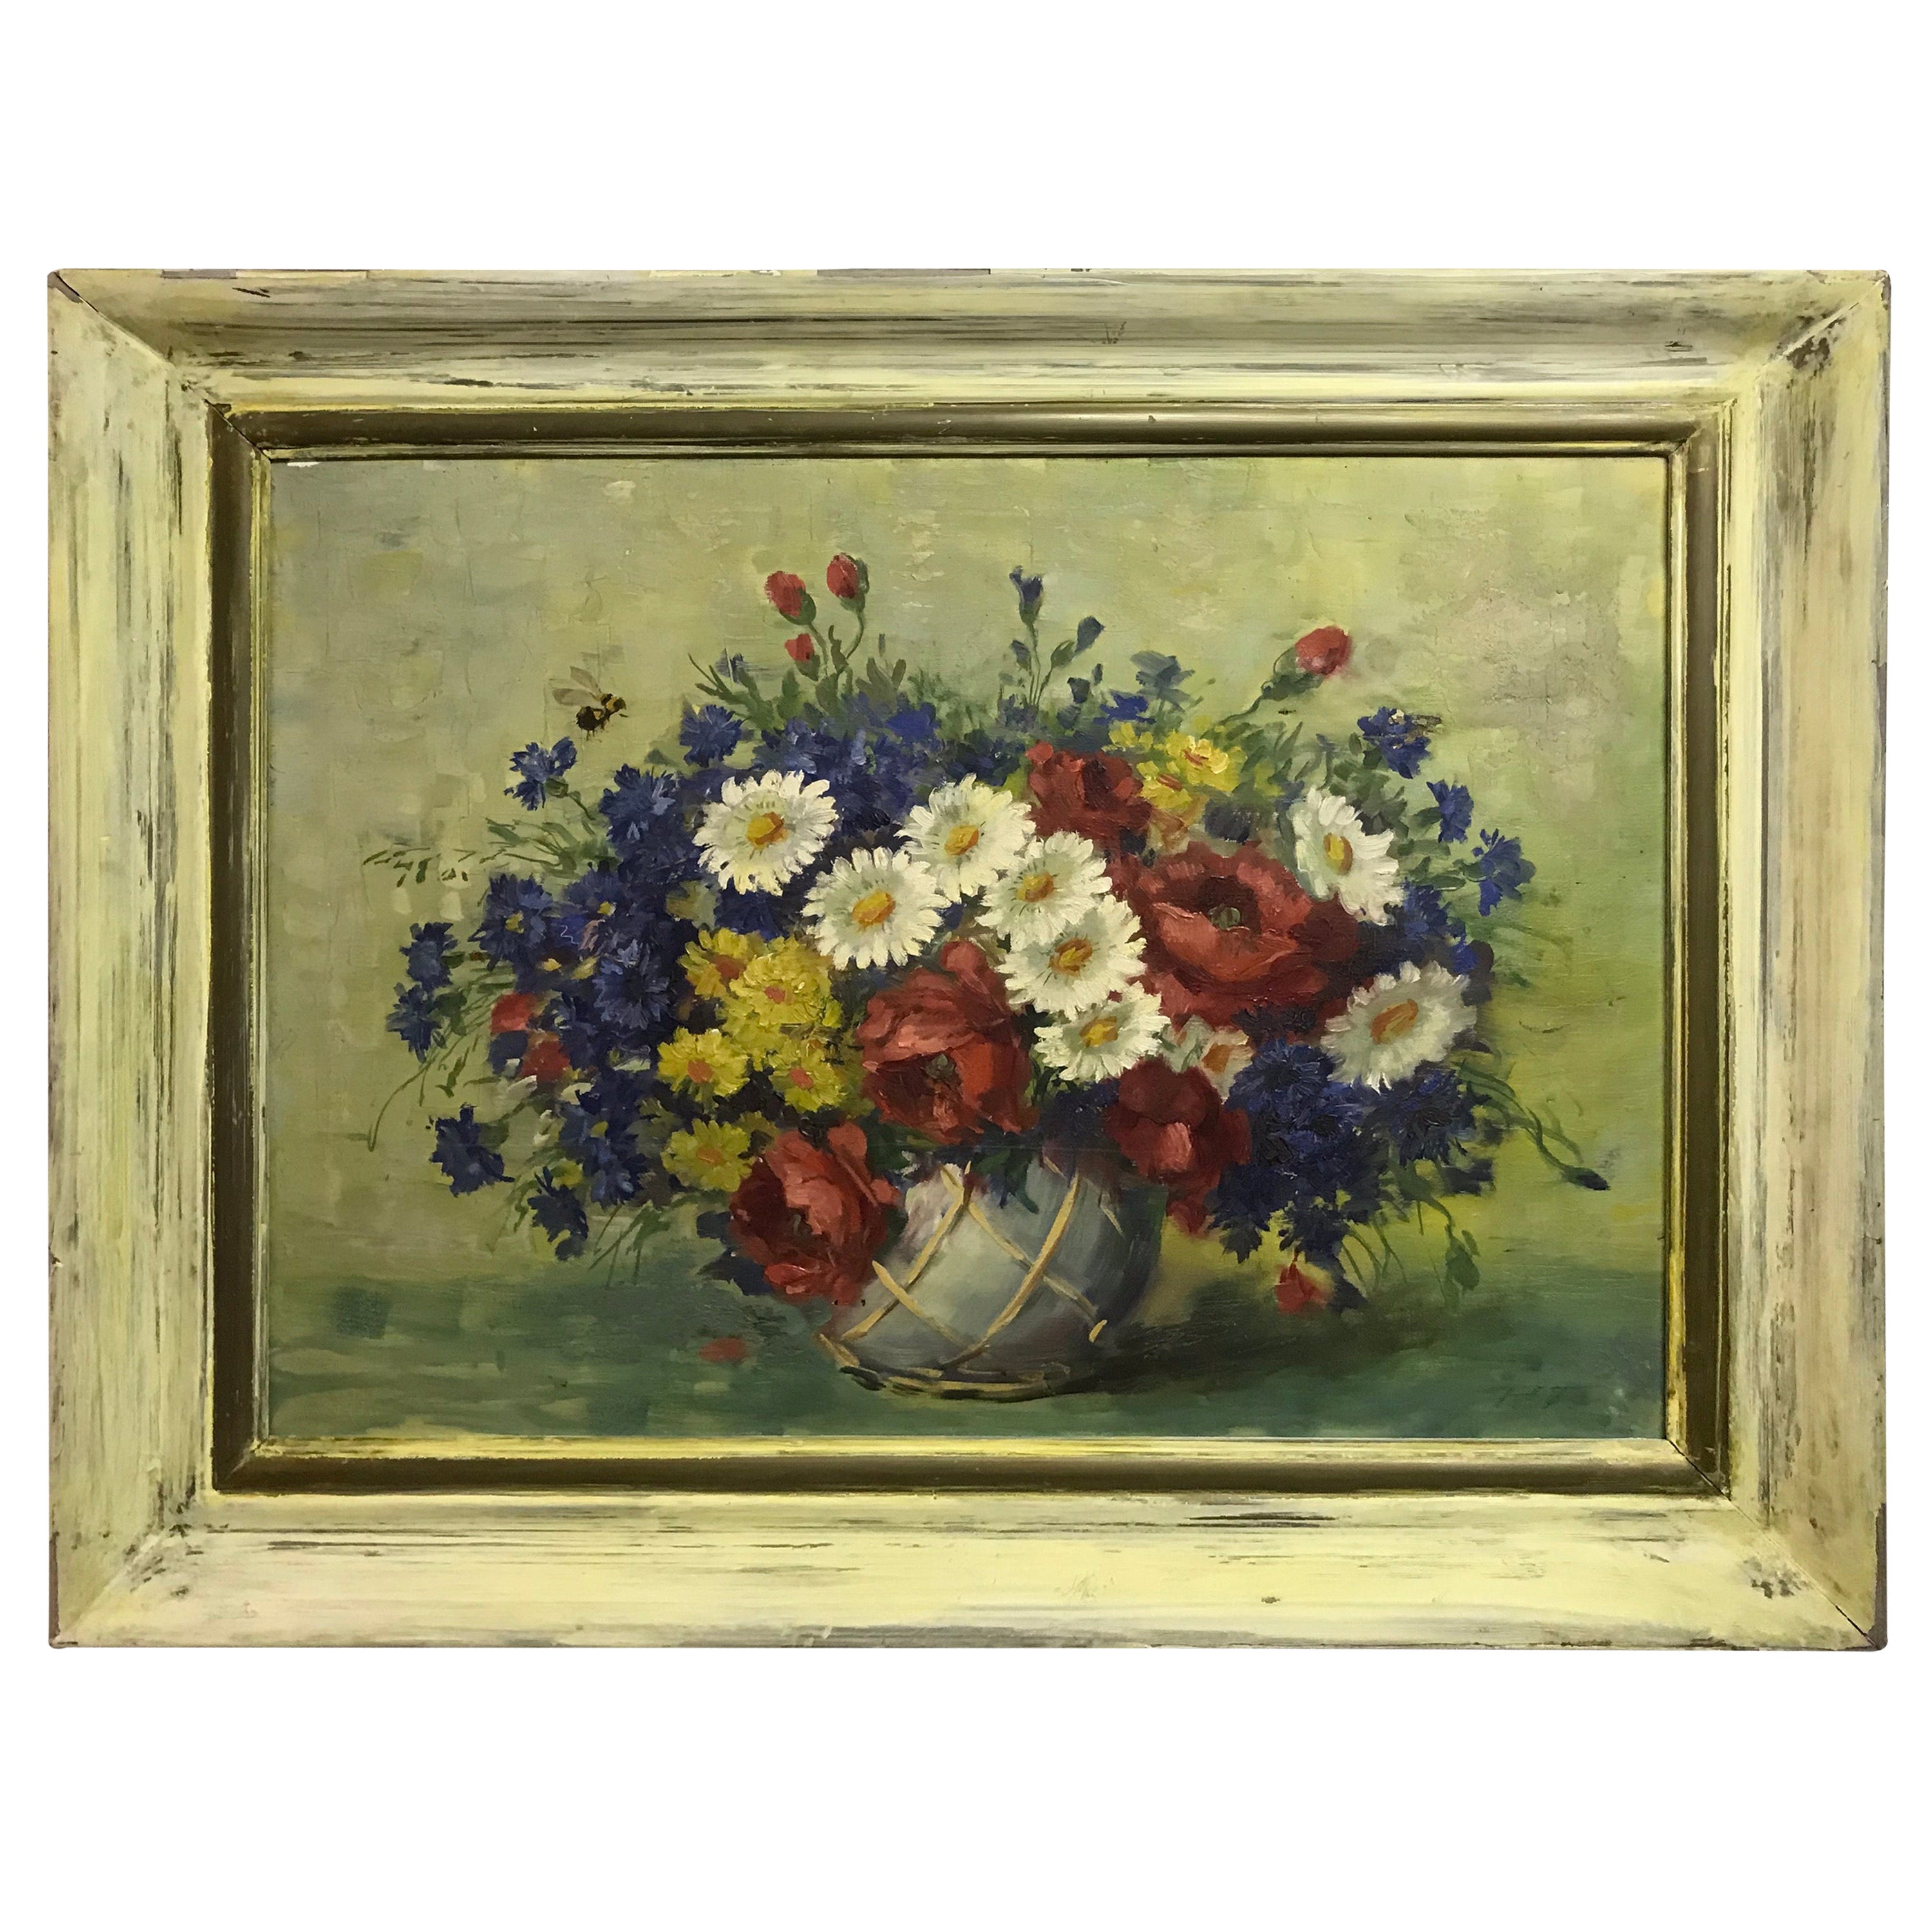 Beautiful Still Life Painting Flowers Colorful 20th Century Canvas